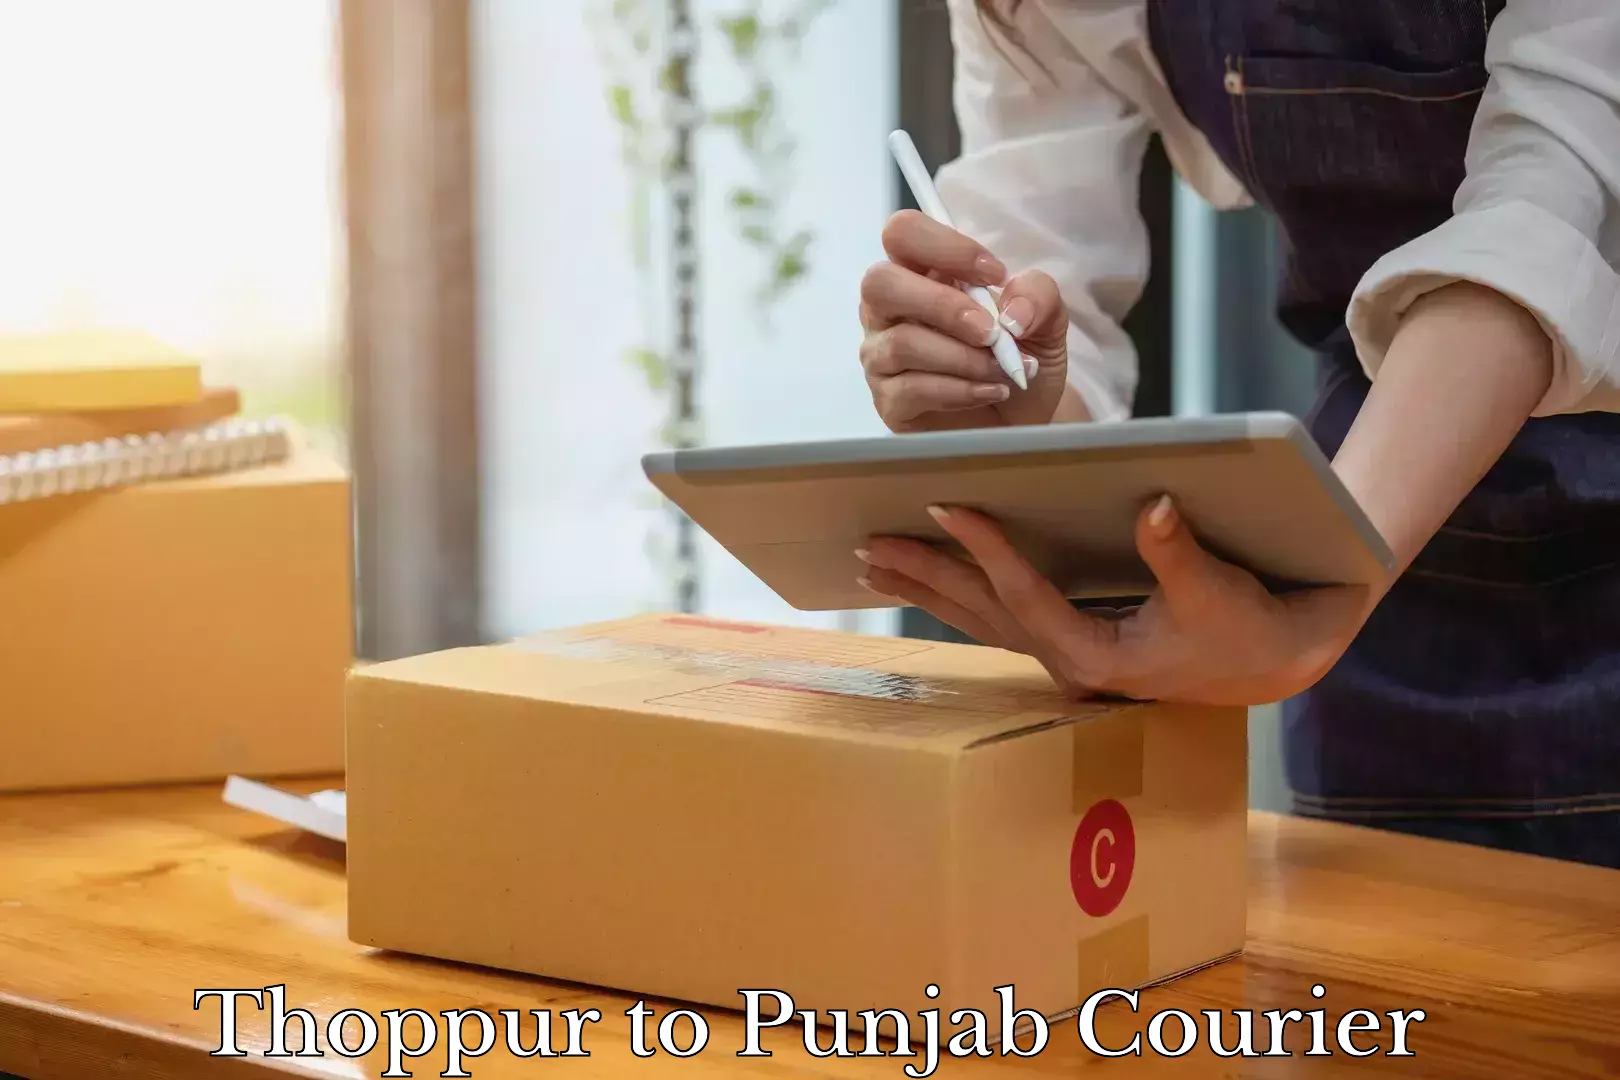 Luggage shipping planner Thoppur to Ludhiana